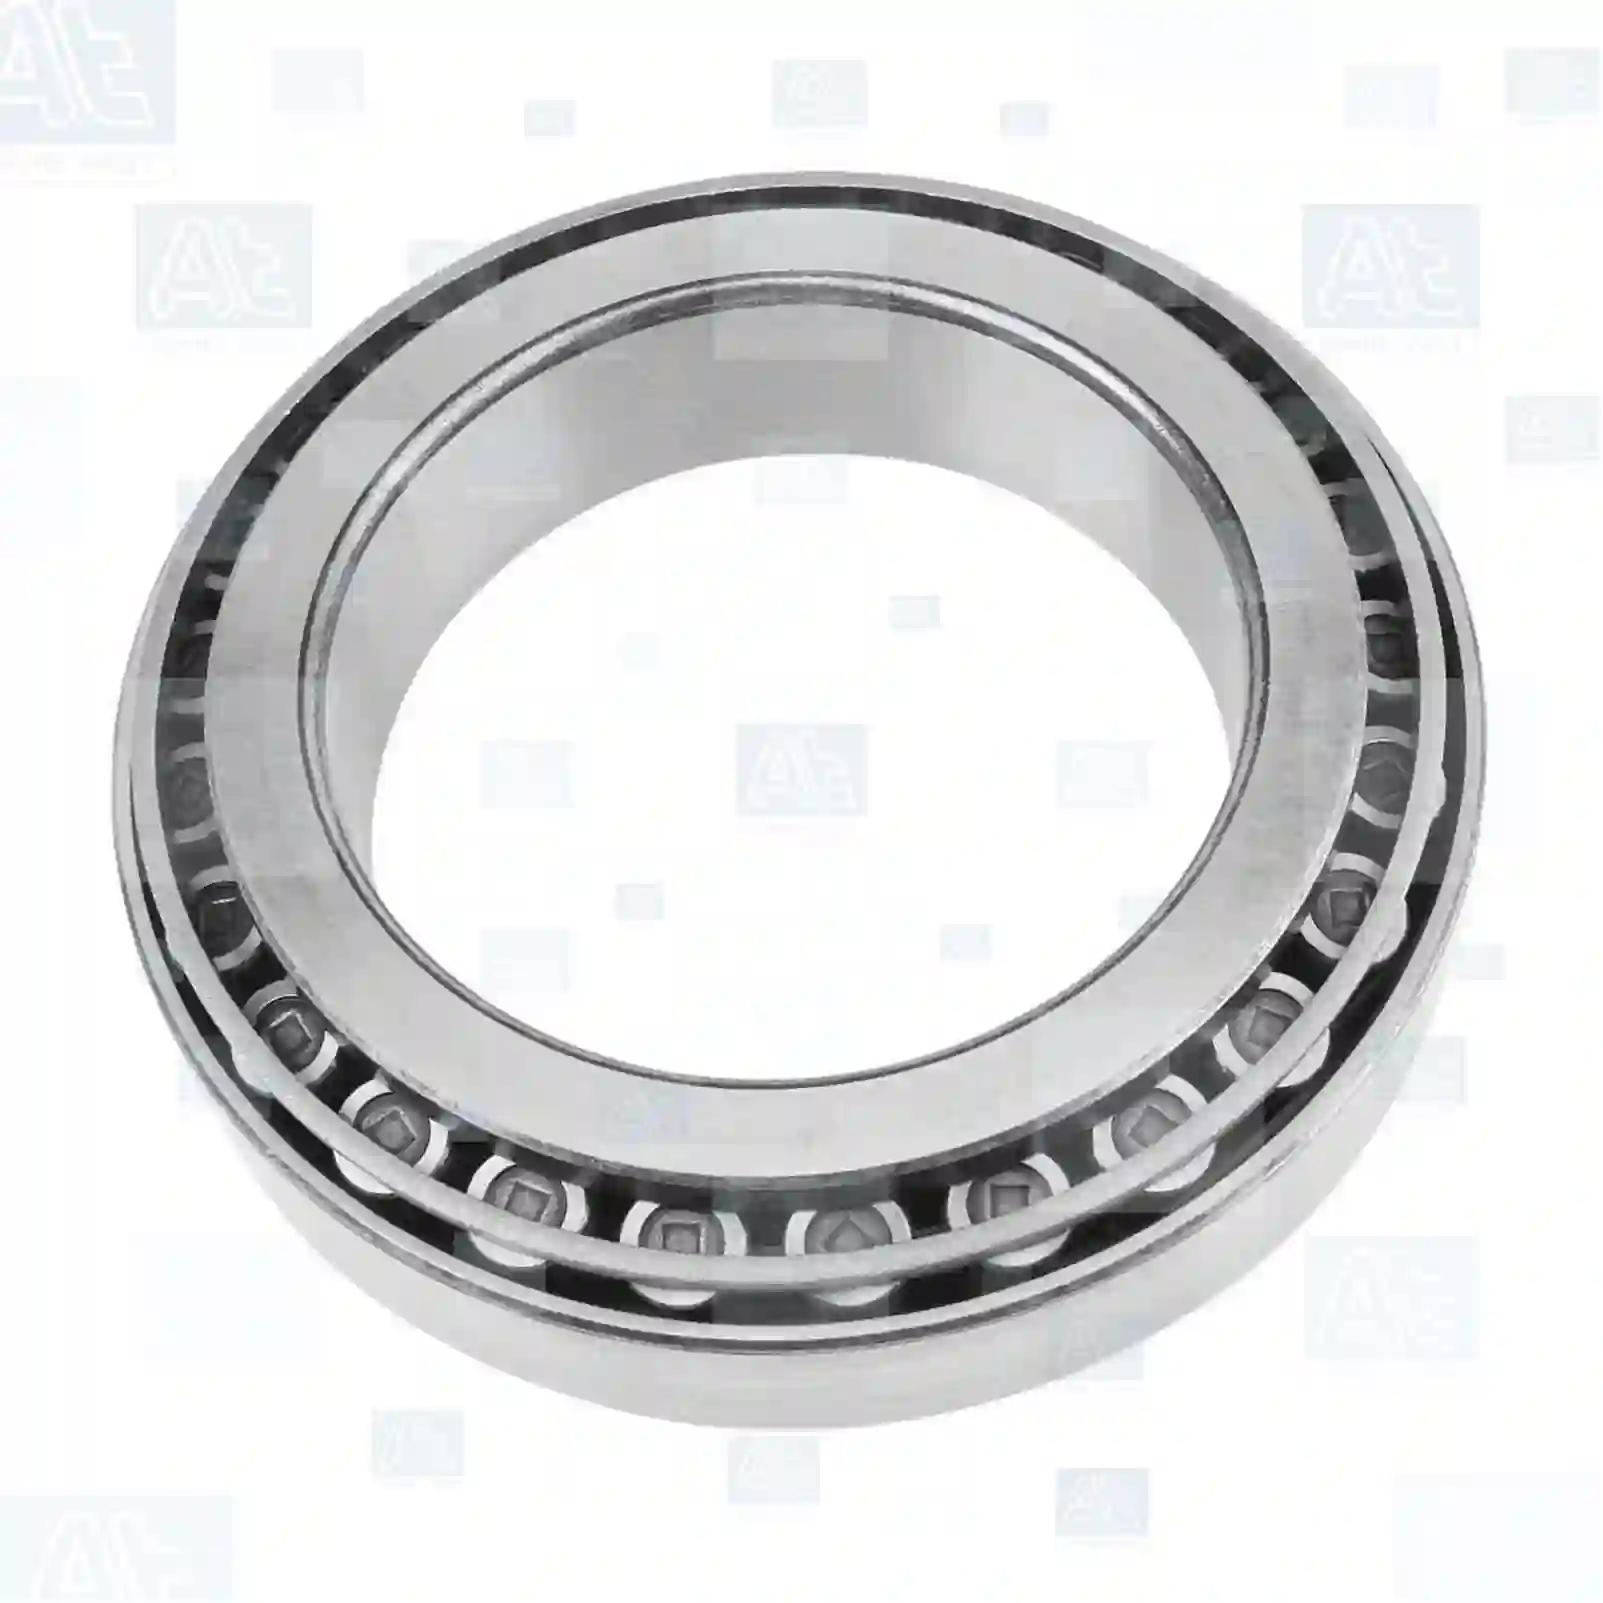 Tapered roller bearing, 77726358, 621285, 621286, 622103, 655407, AMPA012, 06324890012, 06324890064, 06324890114, 000720032019, 0019802602, 0019812602, 0029815405, 0039815105, 0039815405, 0069814705, 5000675133, 5000682662, 5010241096, 5010439224, 5010534822, 5010587011, 1408175, 1911813, 32019XQ, 324714030000, 324741030000, 20593429, 6210074, ZG02994-0008 ||  77726358 At Spare Part | Engine, Accelerator Pedal, Camshaft, Connecting Rod, Crankcase, Crankshaft, Cylinder Head, Engine Suspension Mountings, Exhaust Manifold, Exhaust Gas Recirculation, Filter Kits, Flywheel Housing, General Overhaul Kits, Engine, Intake Manifold, Oil Cleaner, Oil Cooler, Oil Filter, Oil Pump, Oil Sump, Piston & Liner, Sensor & Switch, Timing Case, Turbocharger, Cooling System, Belt Tensioner, Coolant Filter, Coolant Pipe, Corrosion Prevention Agent, Drive, Expansion Tank, Fan, Intercooler, Monitors & Gauges, Radiator, Thermostat, V-Belt / Timing belt, Water Pump, Fuel System, Electronical Injector Unit, Feed Pump, Fuel Filter, cpl., Fuel Gauge Sender,  Fuel Line, Fuel Pump, Fuel Tank, Injection Line Kit, Injection Pump, Exhaust System, Clutch & Pedal, Gearbox, Propeller Shaft, Axles, Brake System, Hubs & Wheels, Suspension, Leaf Spring, Universal Parts / Accessories, Steering, Electrical System, Cabin Tapered roller bearing, 77726358, 621285, 621286, 622103, 655407, AMPA012, 06324890012, 06324890064, 06324890114, 000720032019, 0019802602, 0019812602, 0029815405, 0039815105, 0039815405, 0069814705, 5000675133, 5000682662, 5010241096, 5010439224, 5010534822, 5010587011, 1408175, 1911813, 32019XQ, 324714030000, 324741030000, 20593429, 6210074, ZG02994-0008 ||  77726358 At Spare Part | Engine, Accelerator Pedal, Camshaft, Connecting Rod, Crankcase, Crankshaft, Cylinder Head, Engine Suspension Mountings, Exhaust Manifold, Exhaust Gas Recirculation, Filter Kits, Flywheel Housing, General Overhaul Kits, Engine, Intake Manifold, Oil Cleaner, Oil Cooler, Oil Filter, Oil Pump, Oil Sump, Piston & Liner, Sensor & Switch, Timing Case, Turbocharger, Cooling System, Belt Tensioner, Coolant Filter, Coolant Pipe, Corrosion Prevention Agent, Drive, Expansion Tank, Fan, Intercooler, Monitors & Gauges, Radiator, Thermostat, V-Belt / Timing belt, Water Pump, Fuel System, Electronical Injector Unit, Feed Pump, Fuel Filter, cpl., Fuel Gauge Sender,  Fuel Line, Fuel Pump, Fuel Tank, Injection Line Kit, Injection Pump, Exhaust System, Clutch & Pedal, Gearbox, Propeller Shaft, Axles, Brake System, Hubs & Wheels, Suspension, Leaf Spring, Universal Parts / Accessories, Steering, Electrical System, Cabin